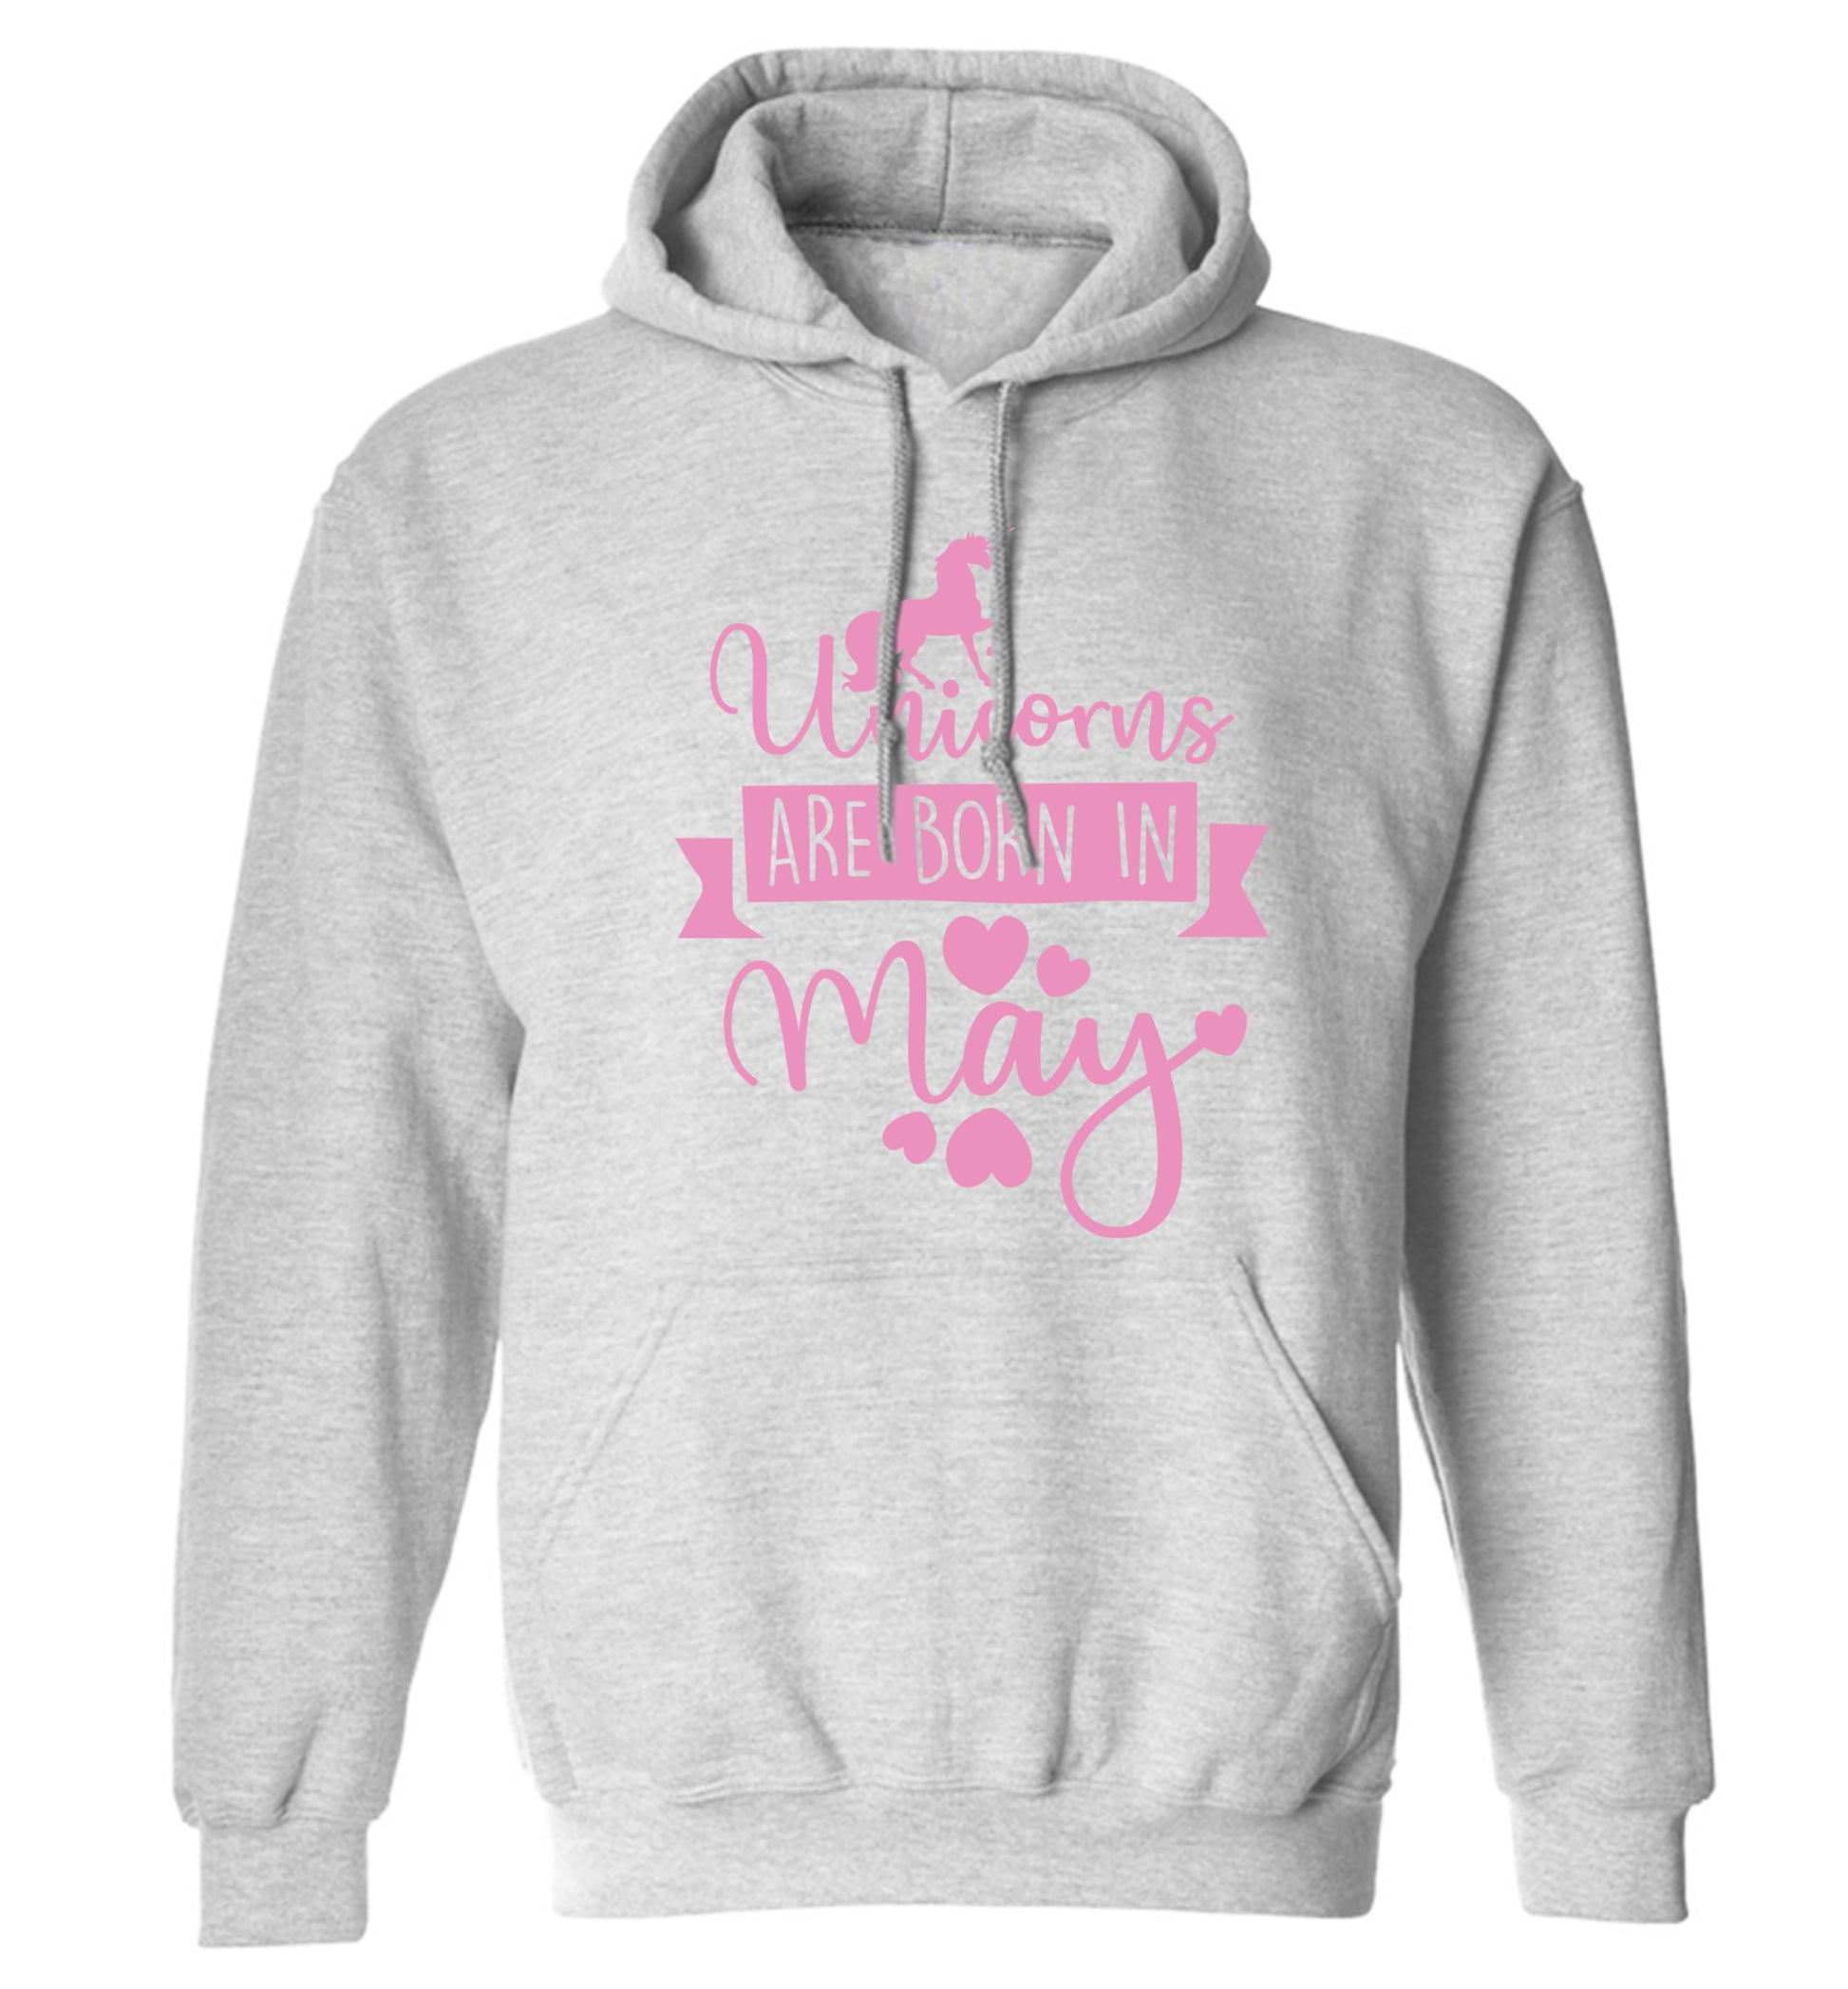 Unicorns are born in May adults unisex grey hoodie 2XL